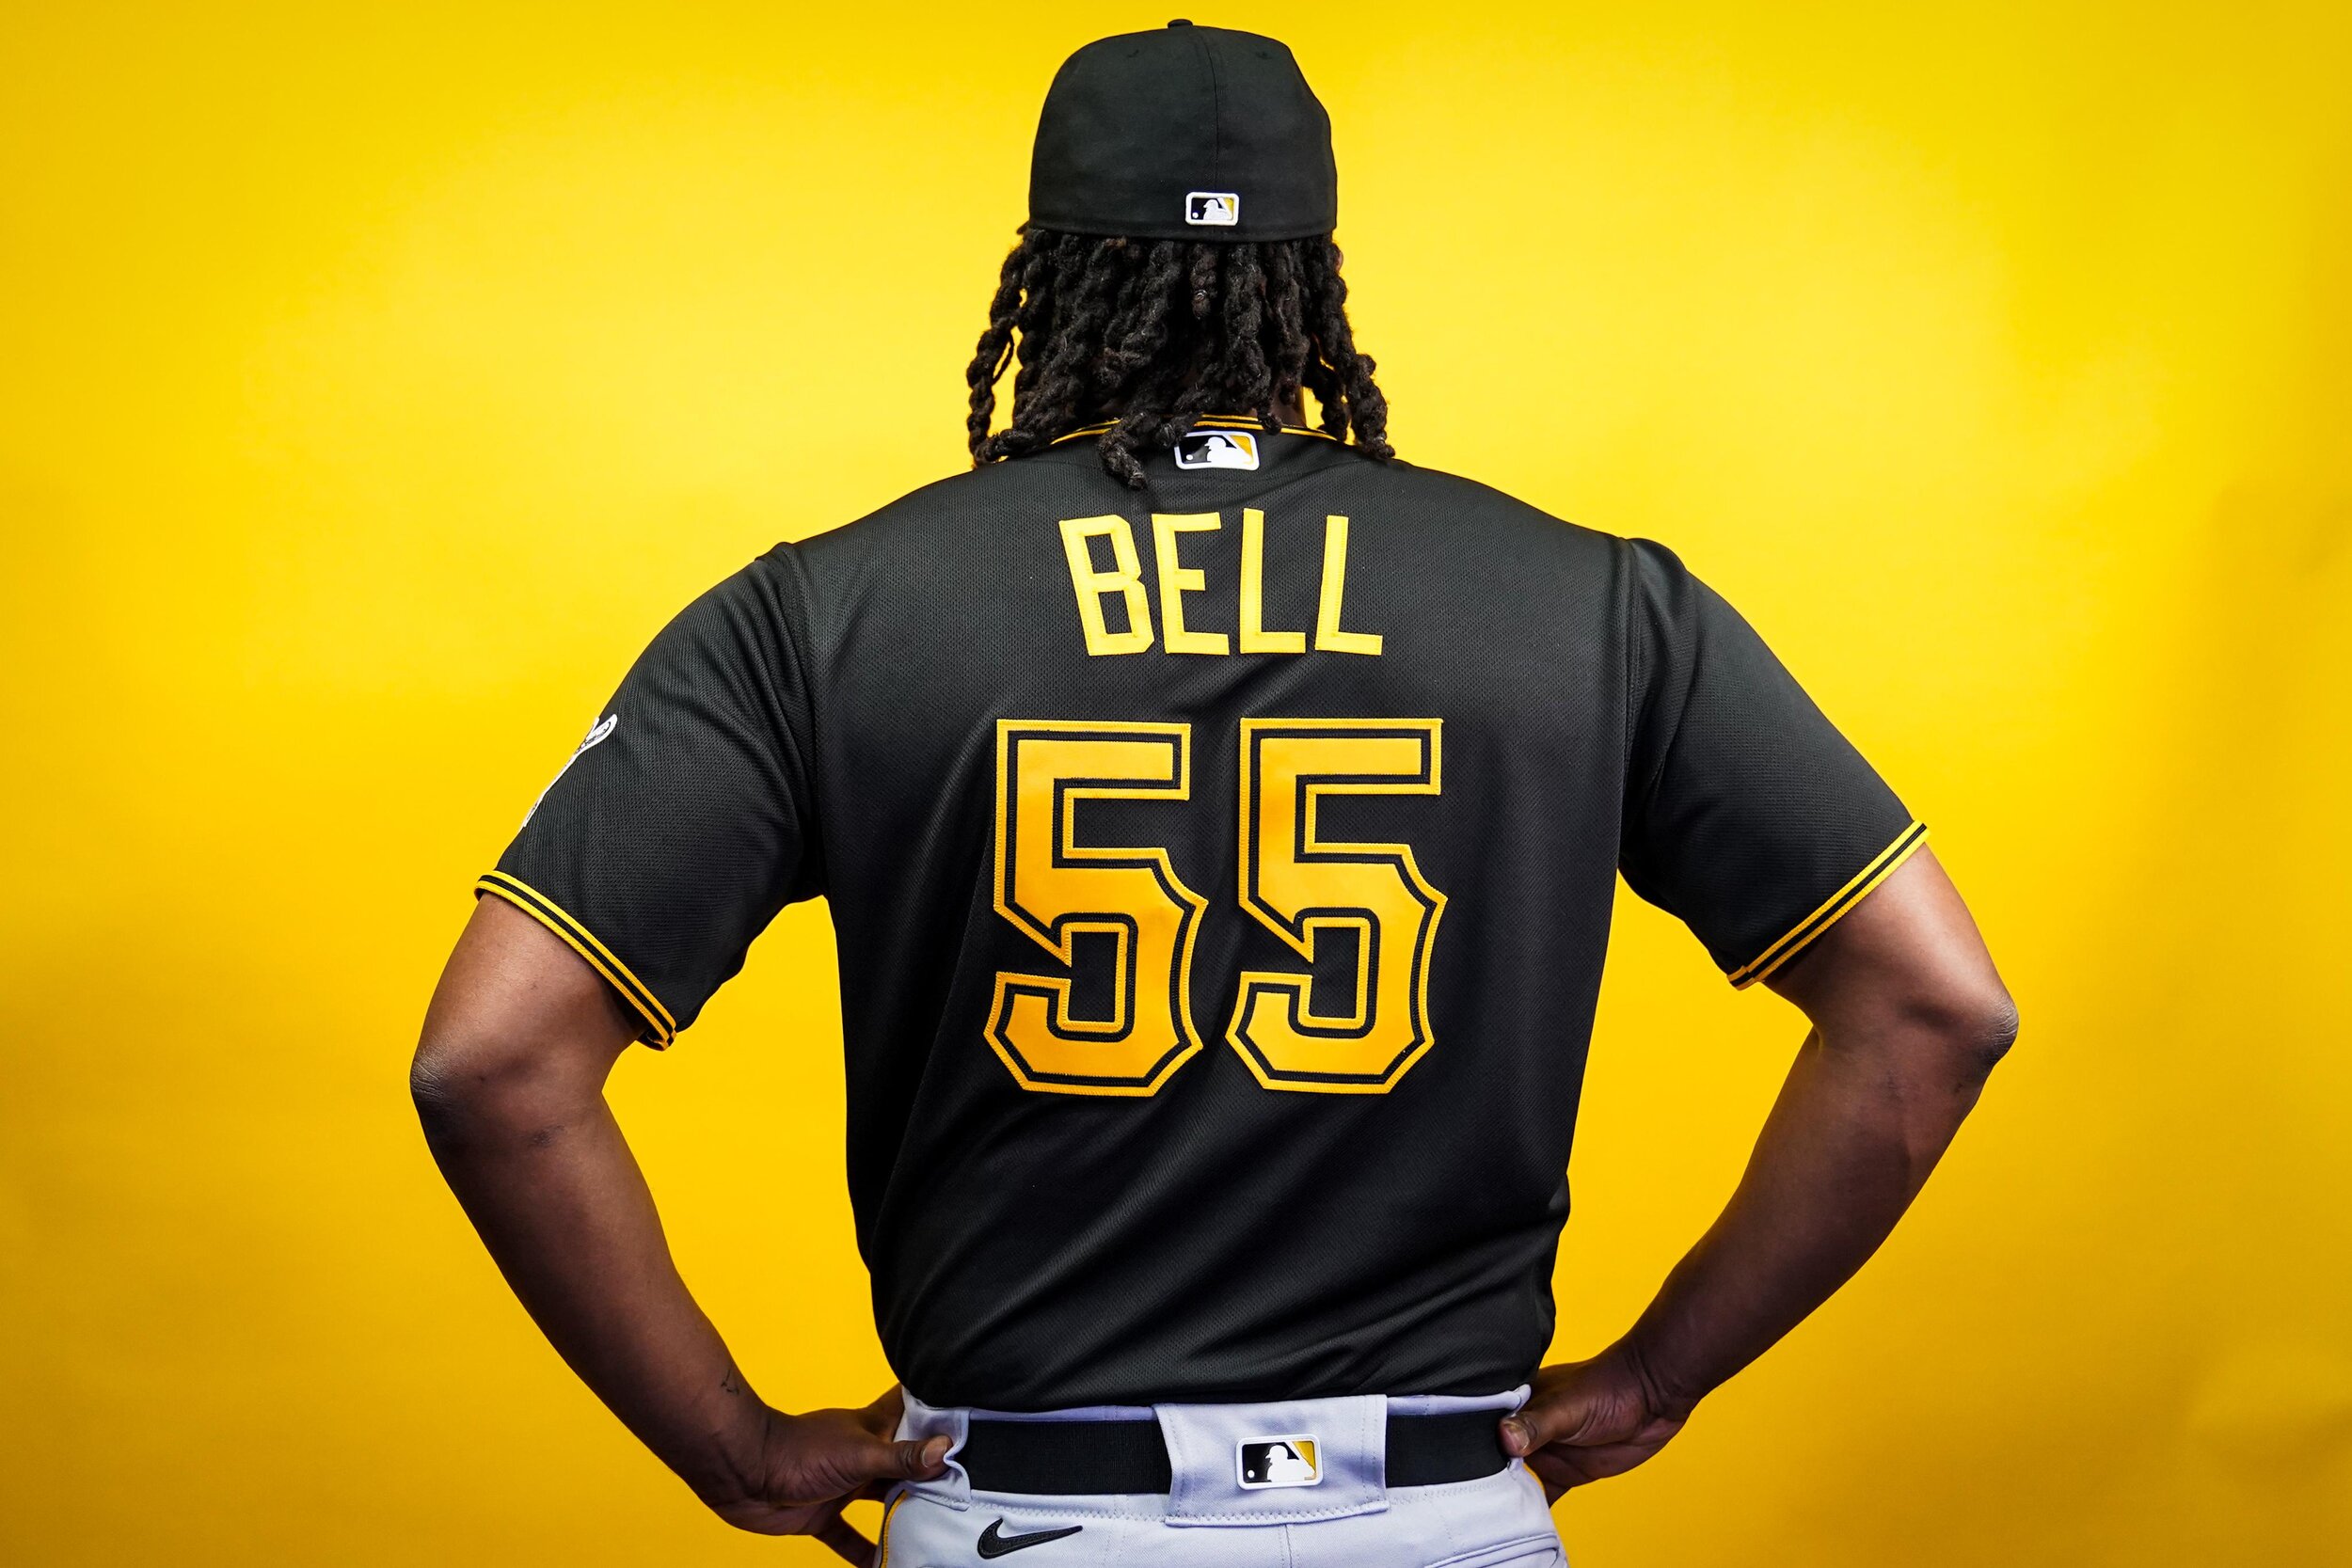 pittsburgh pirates uniforms today